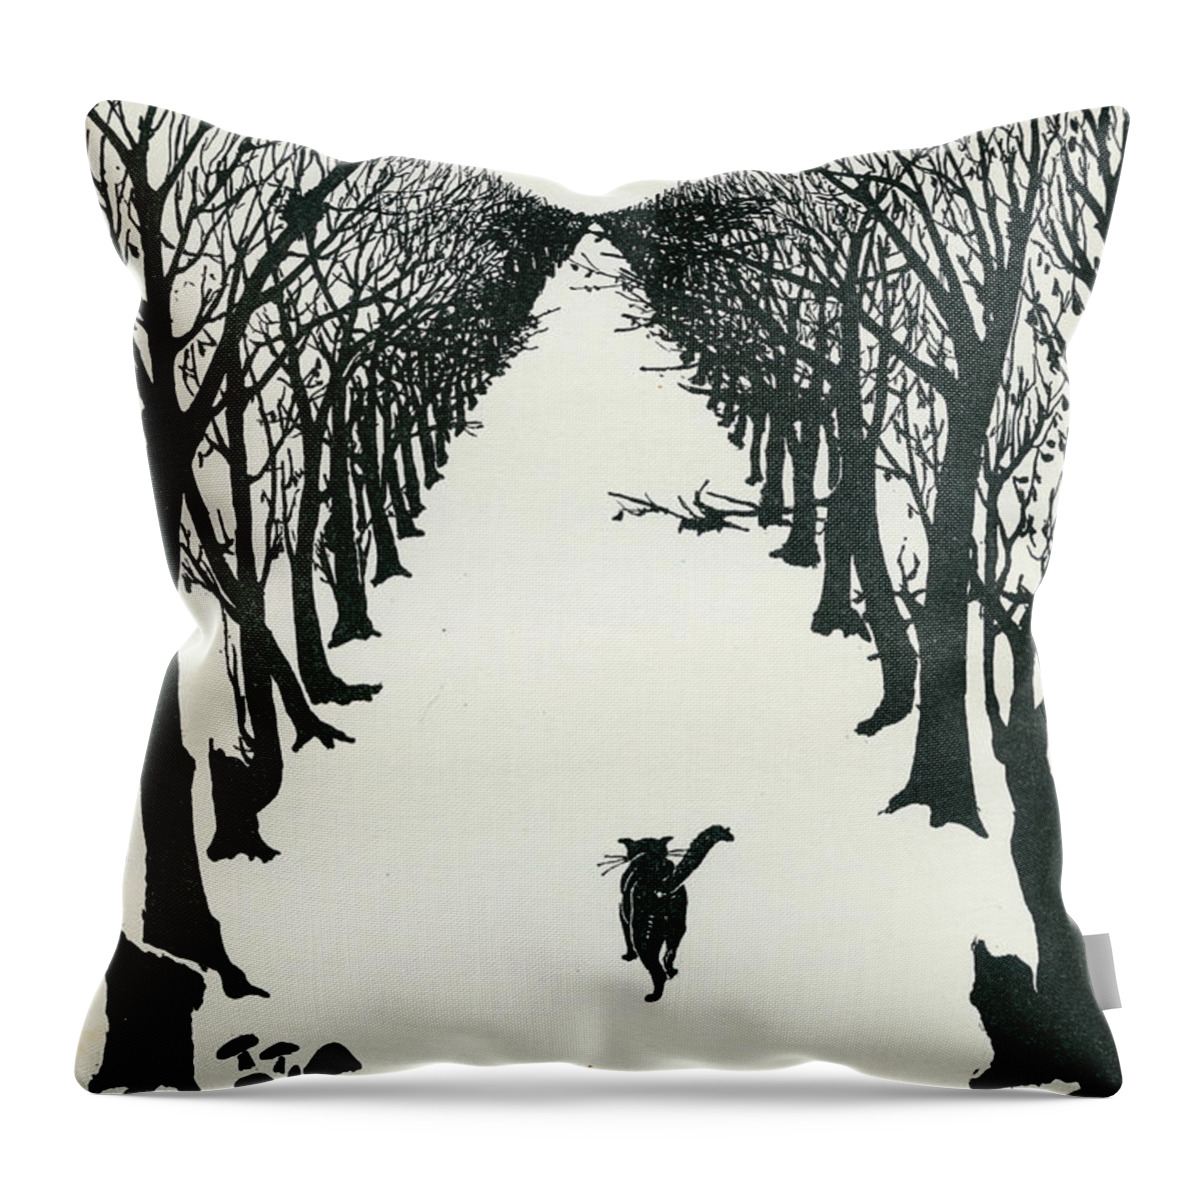 Book Illustration Throw Pillow featuring the drawing The Cat That Walked by Himself by Rudyard Kipling